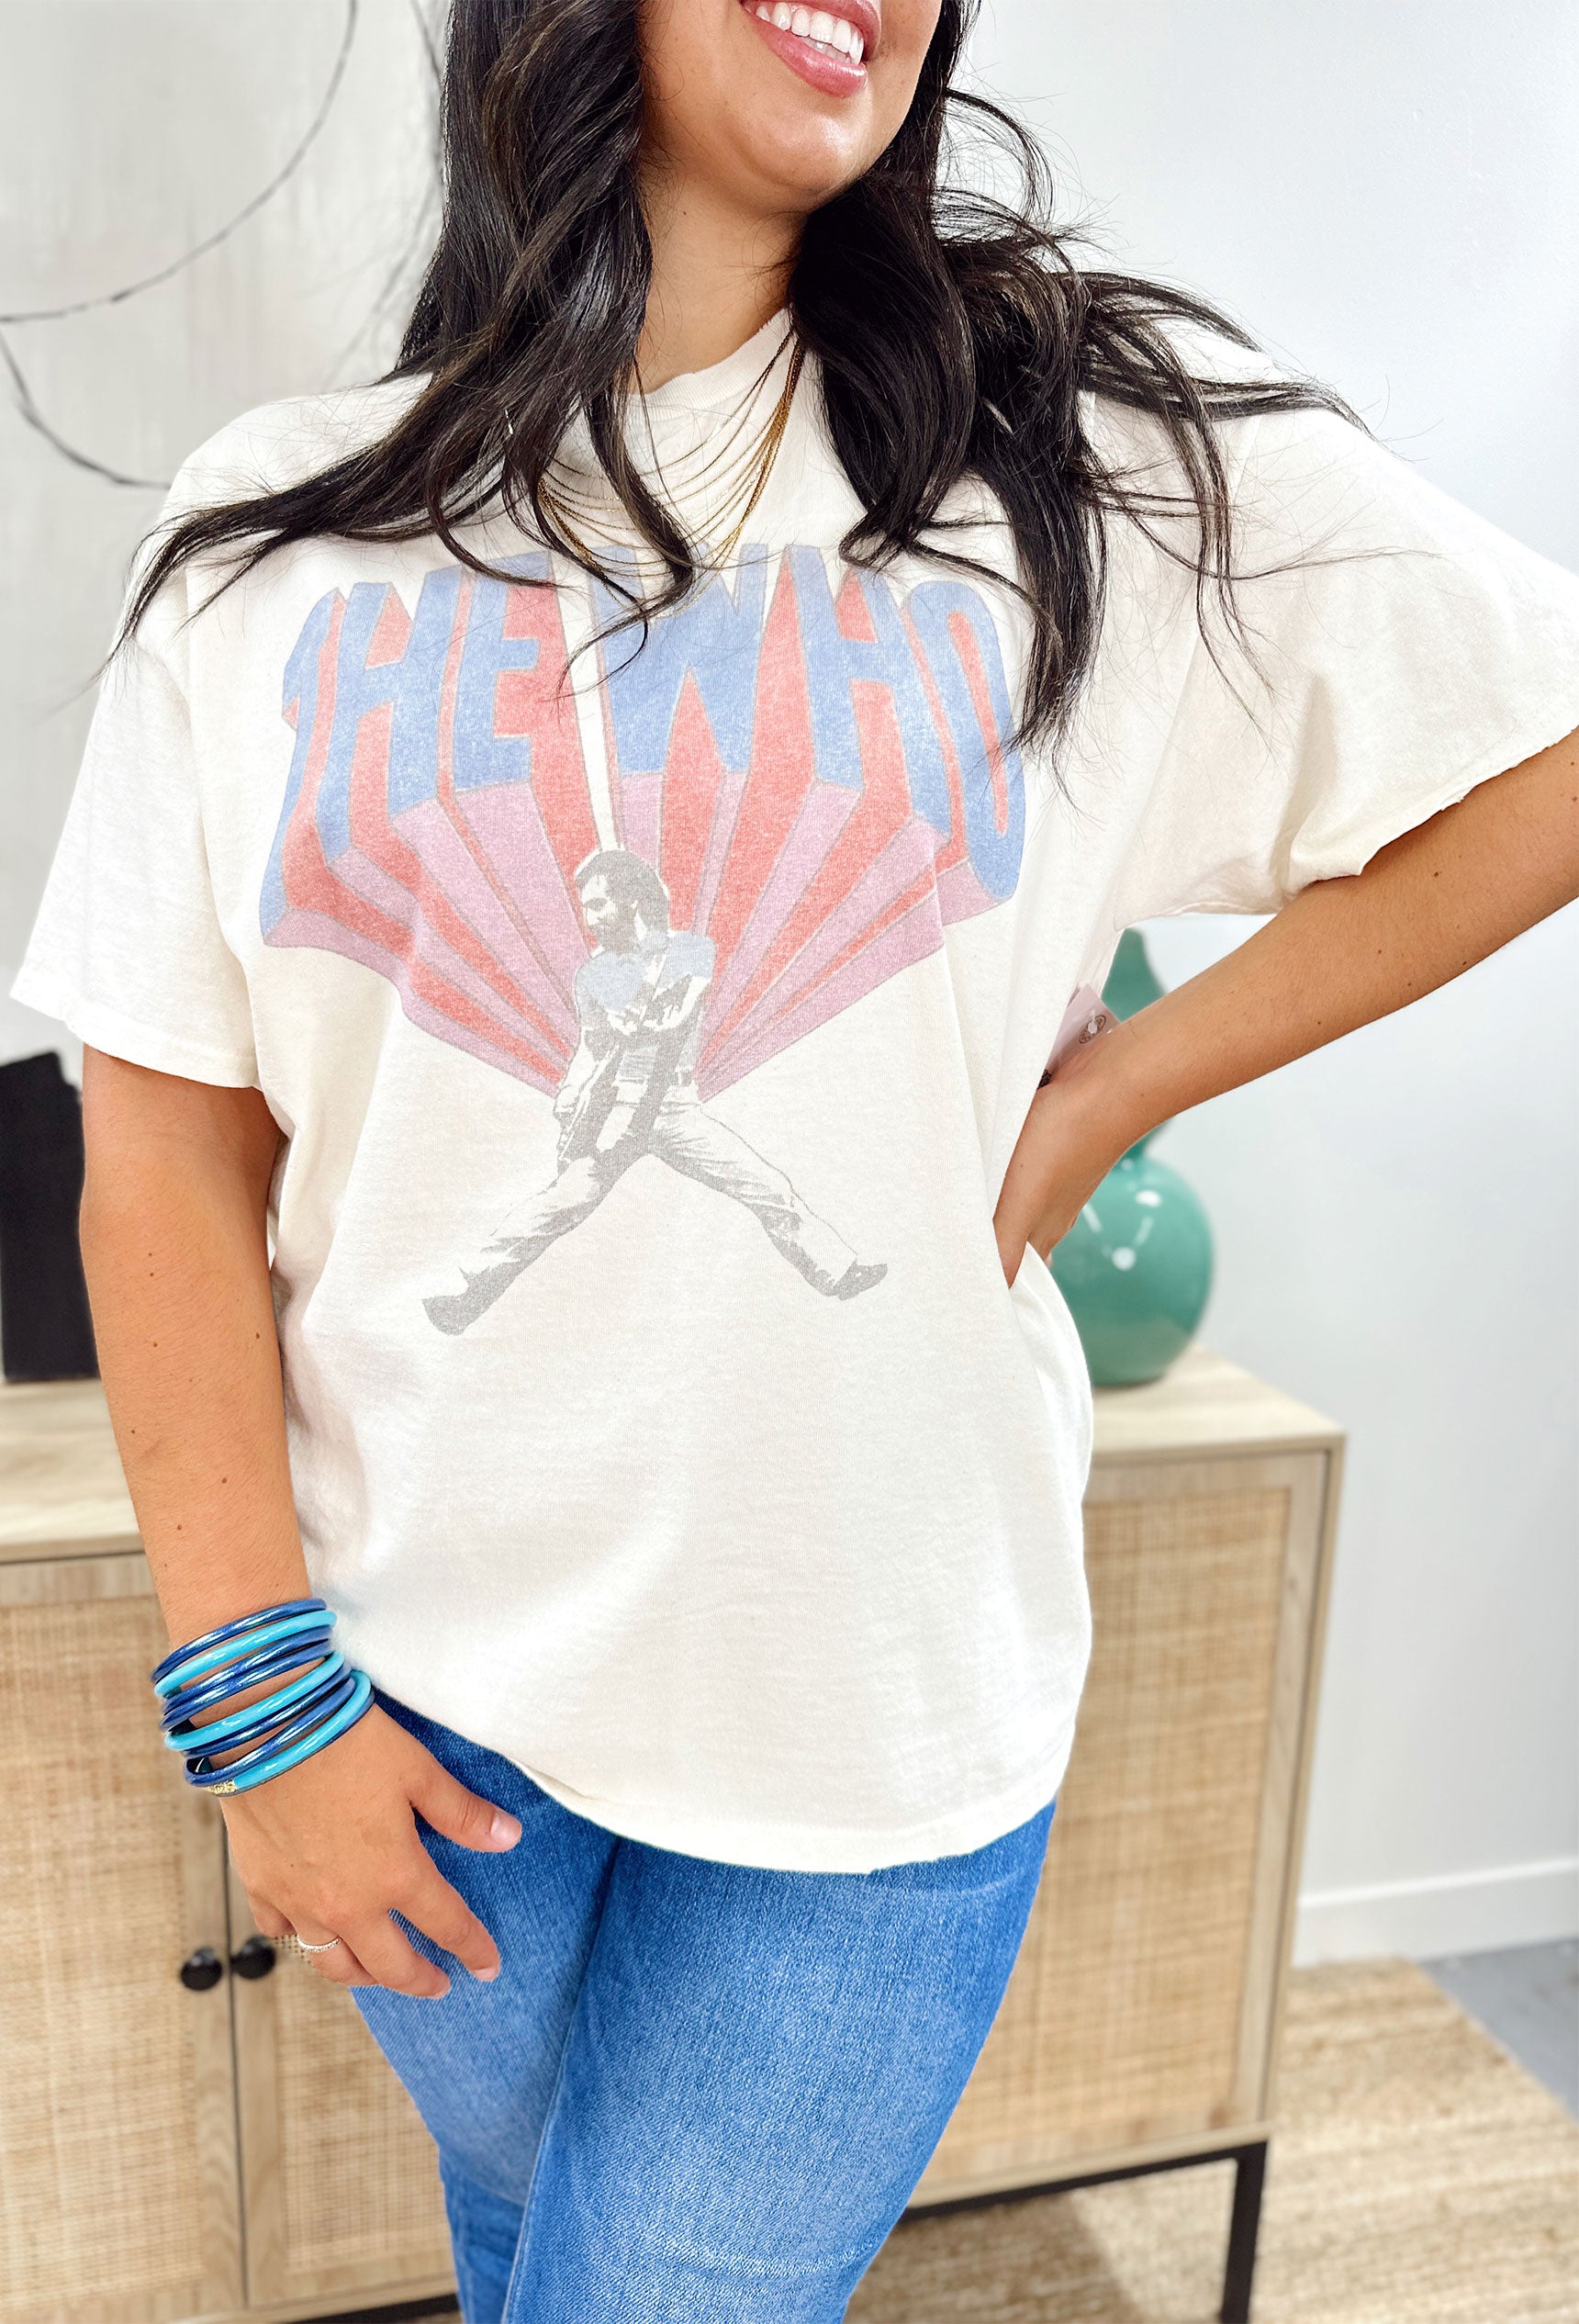 The Who Graphic Tee, cream graphic tee with red, blue and grey the who graphic